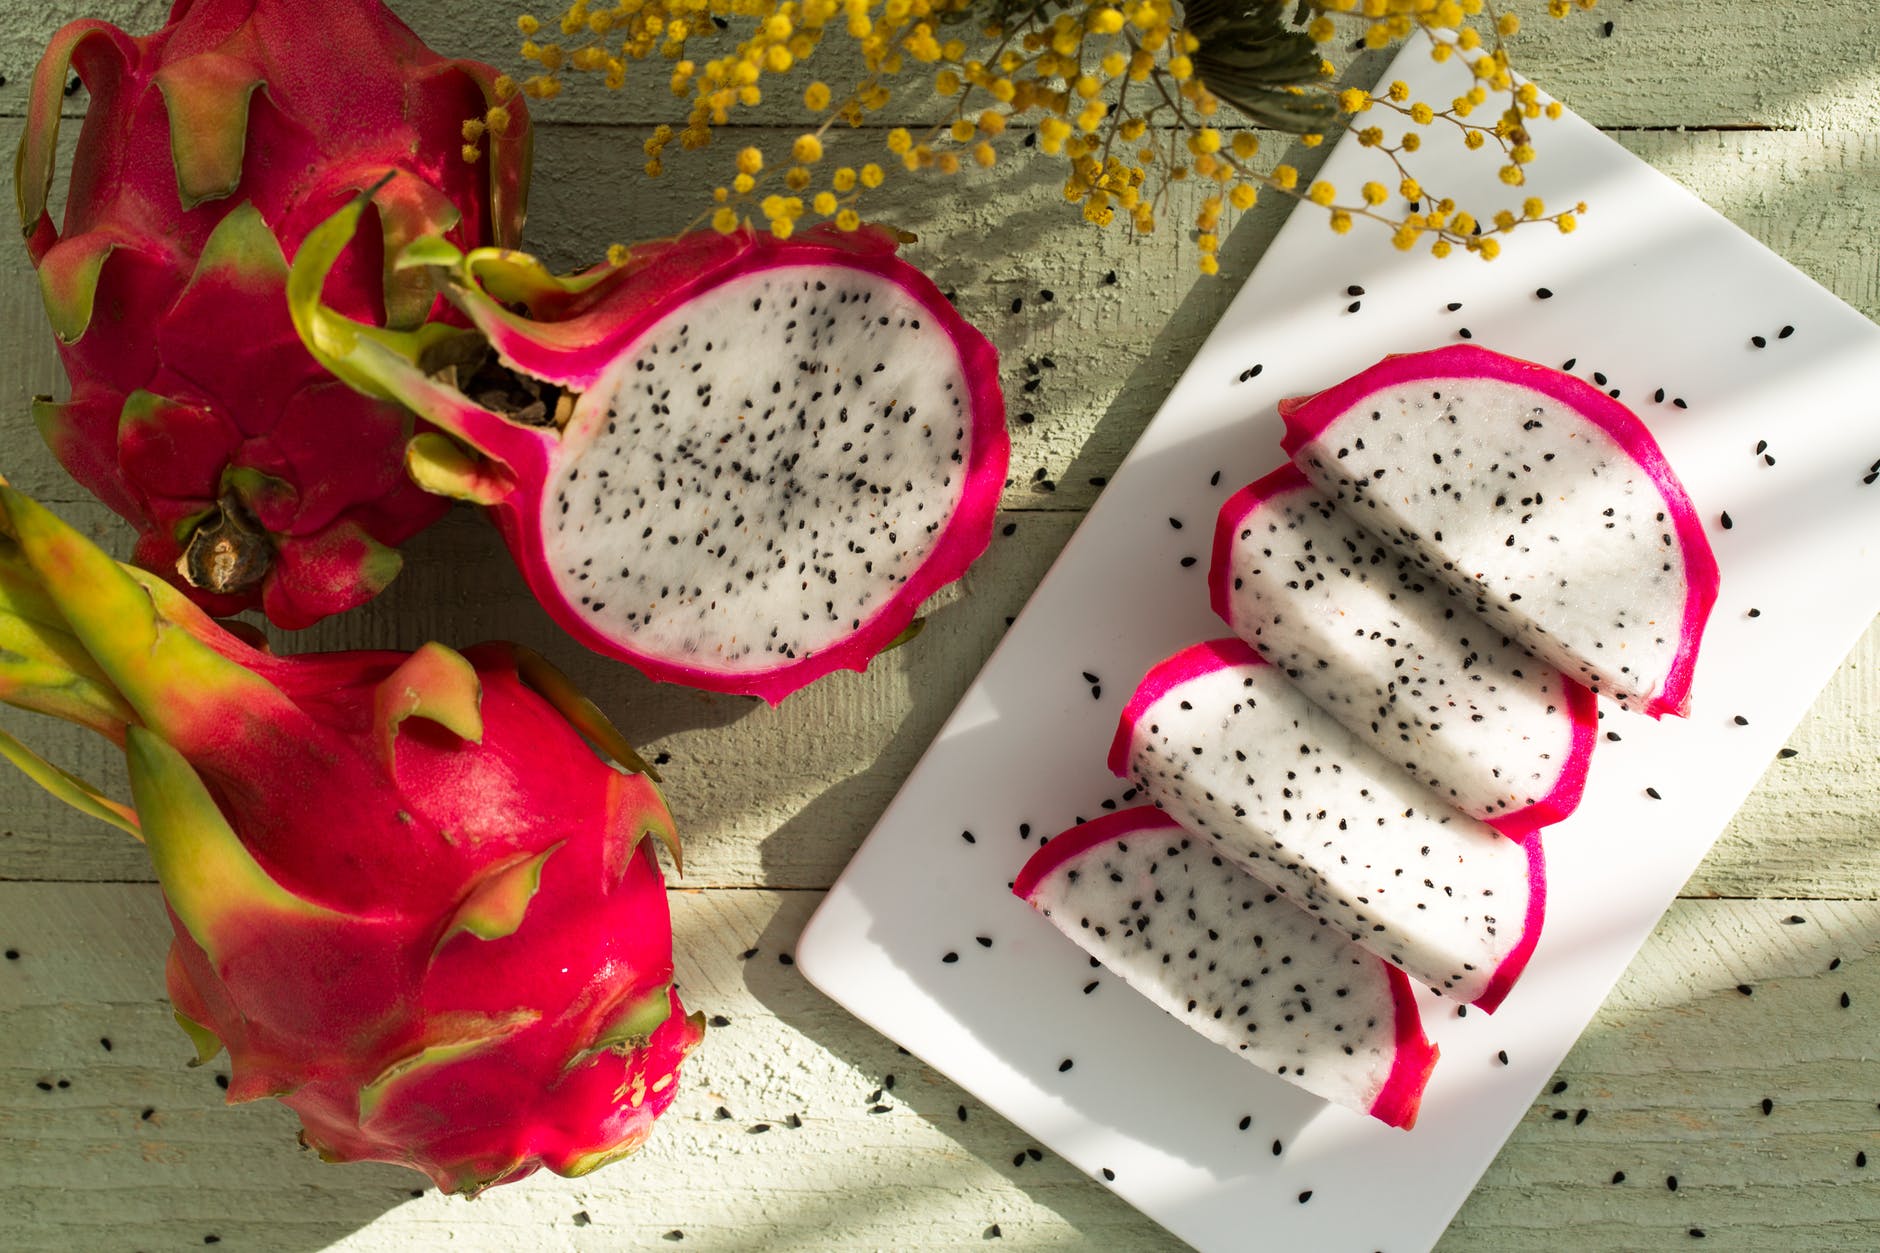 8 Surprising Health Benefits of Dragon Fruit You Never Knew